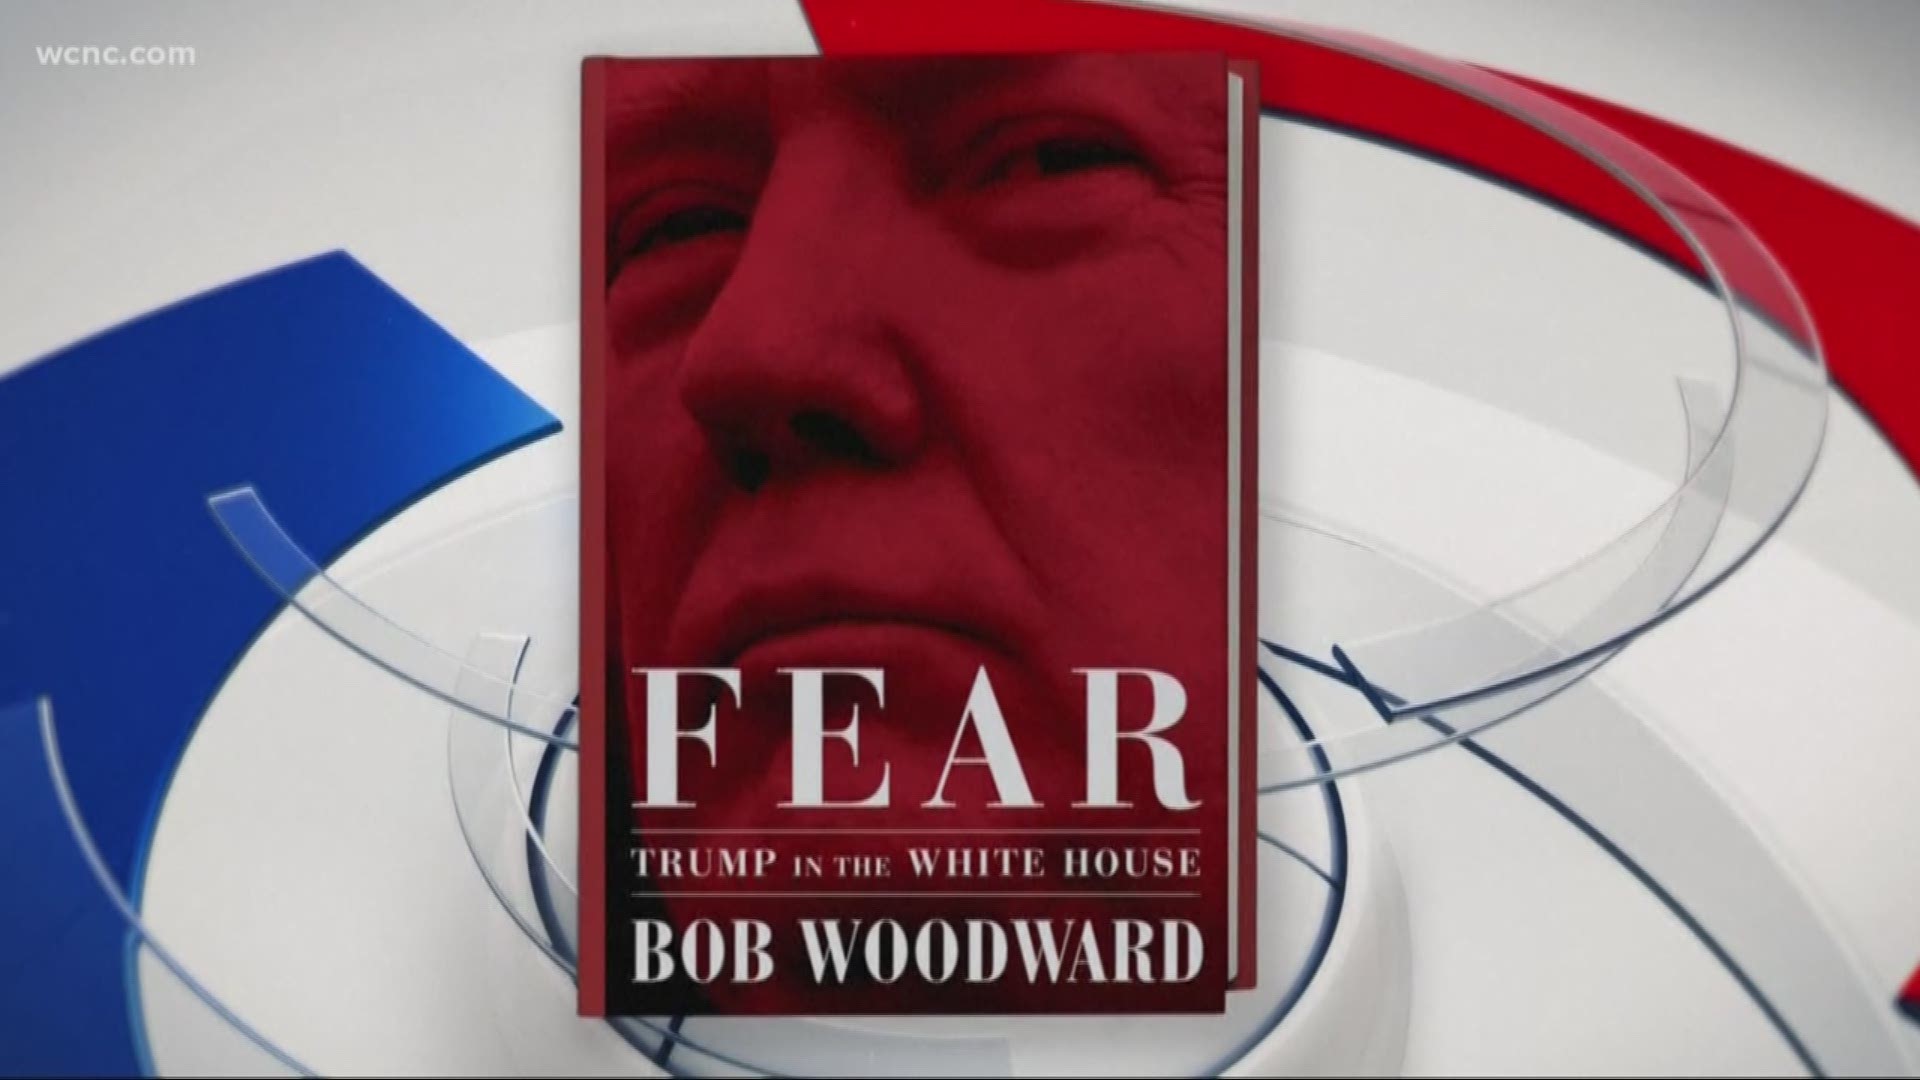 A bombshell book from former Washington Post reporter Bob Woodward has made damning allegations as President Trump and his administration.